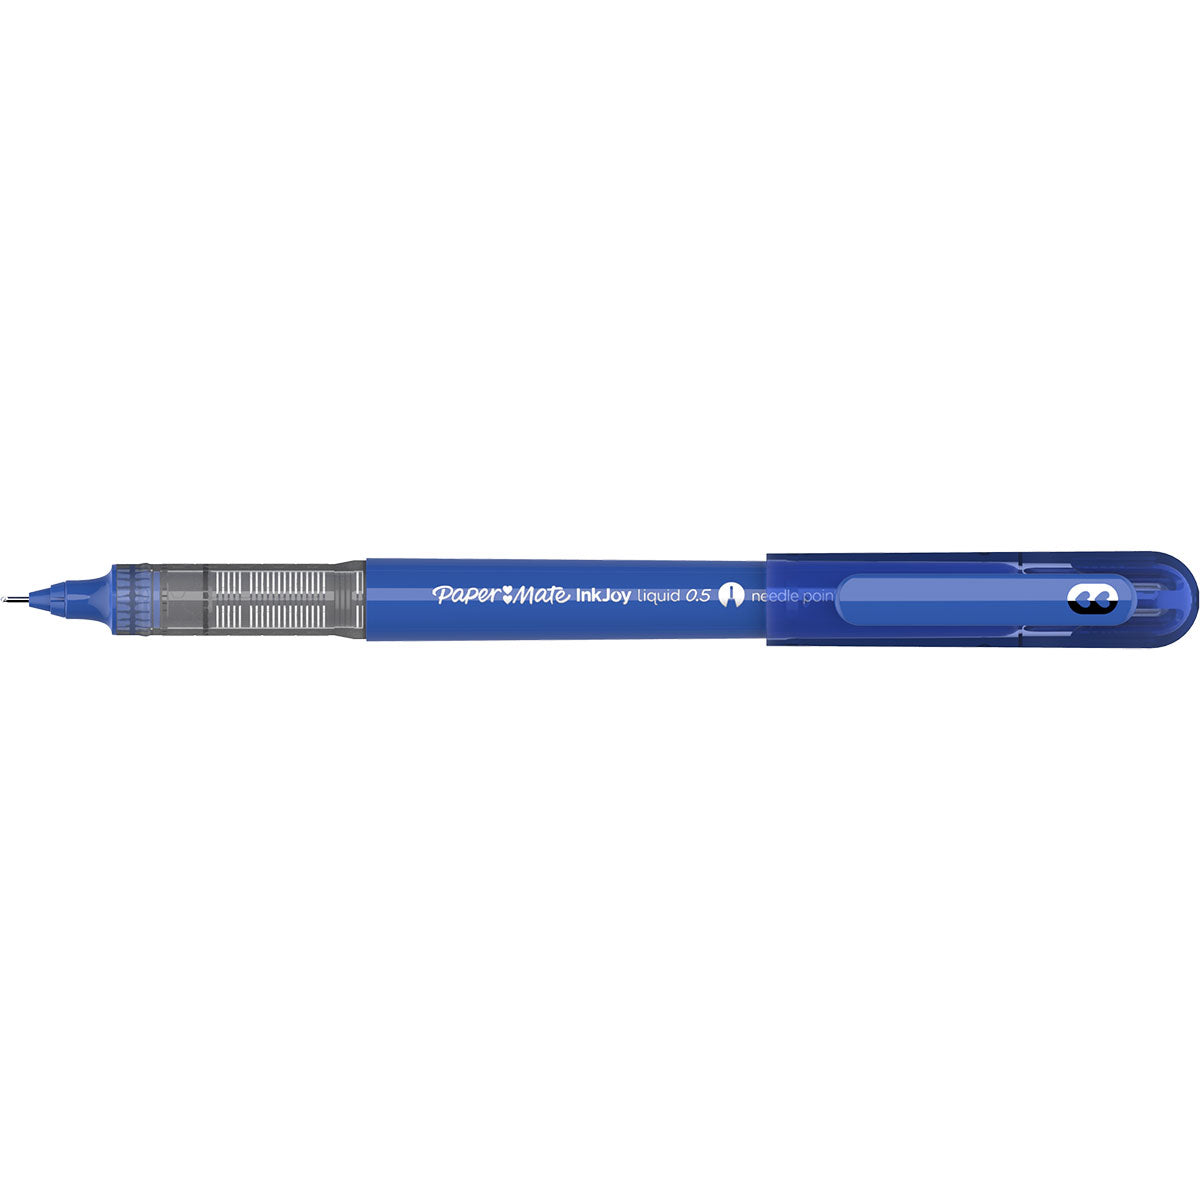 Paper Mate Inkjoy Liquid Needle Point Rollerball Pen Blue 0.5